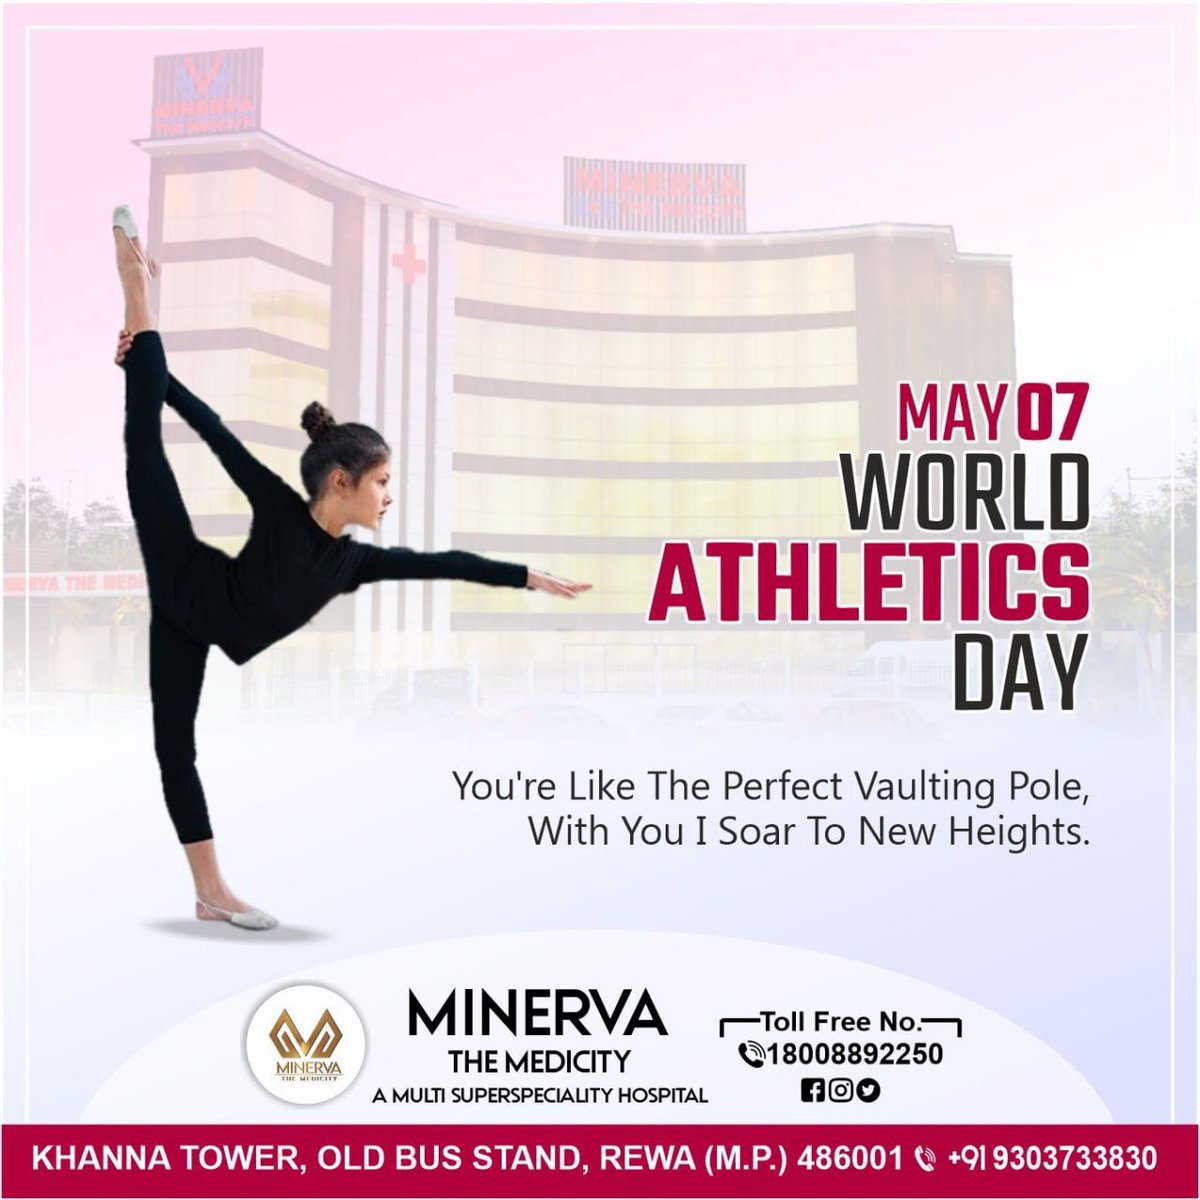 'WORLD ATHLETICS DAY'
You're Like The Perfect Vaulting Pole, With You I Soar To New Heights.

Contacts us now:
Toll free no:- 18008892250
Minerva The Medicity

#healthtrip #WorldAtheistDay #minervathemedicity #minervahospital #besthospital #bestdoctors
#healthcamp